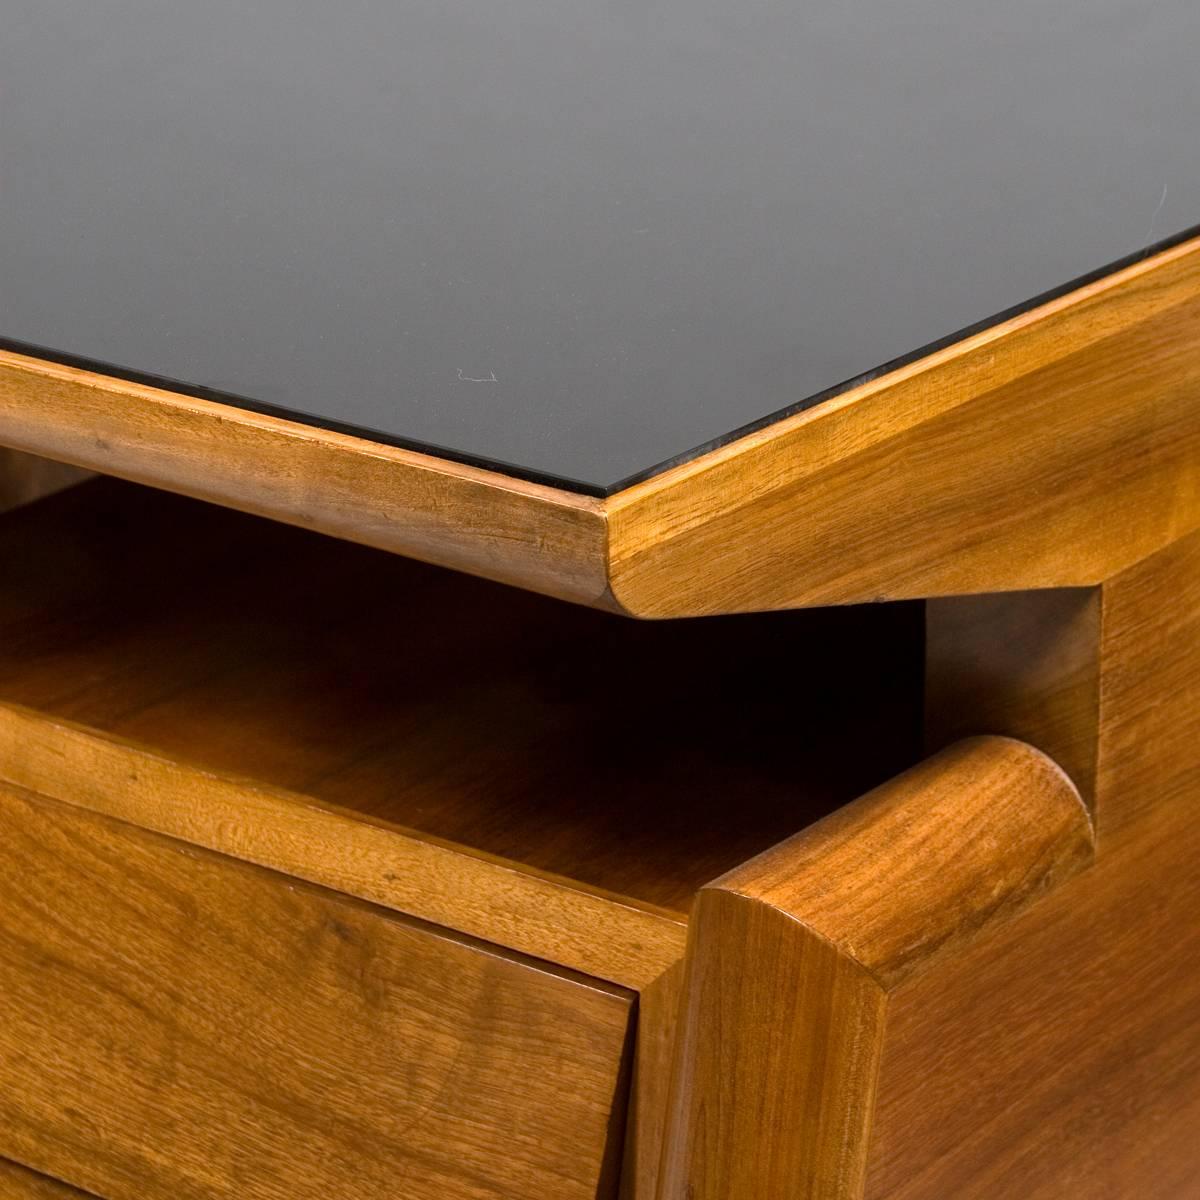 Substantial Walnut Desk Attributed to Carlo di Carli In Excellent Condition For Sale In New York, NY